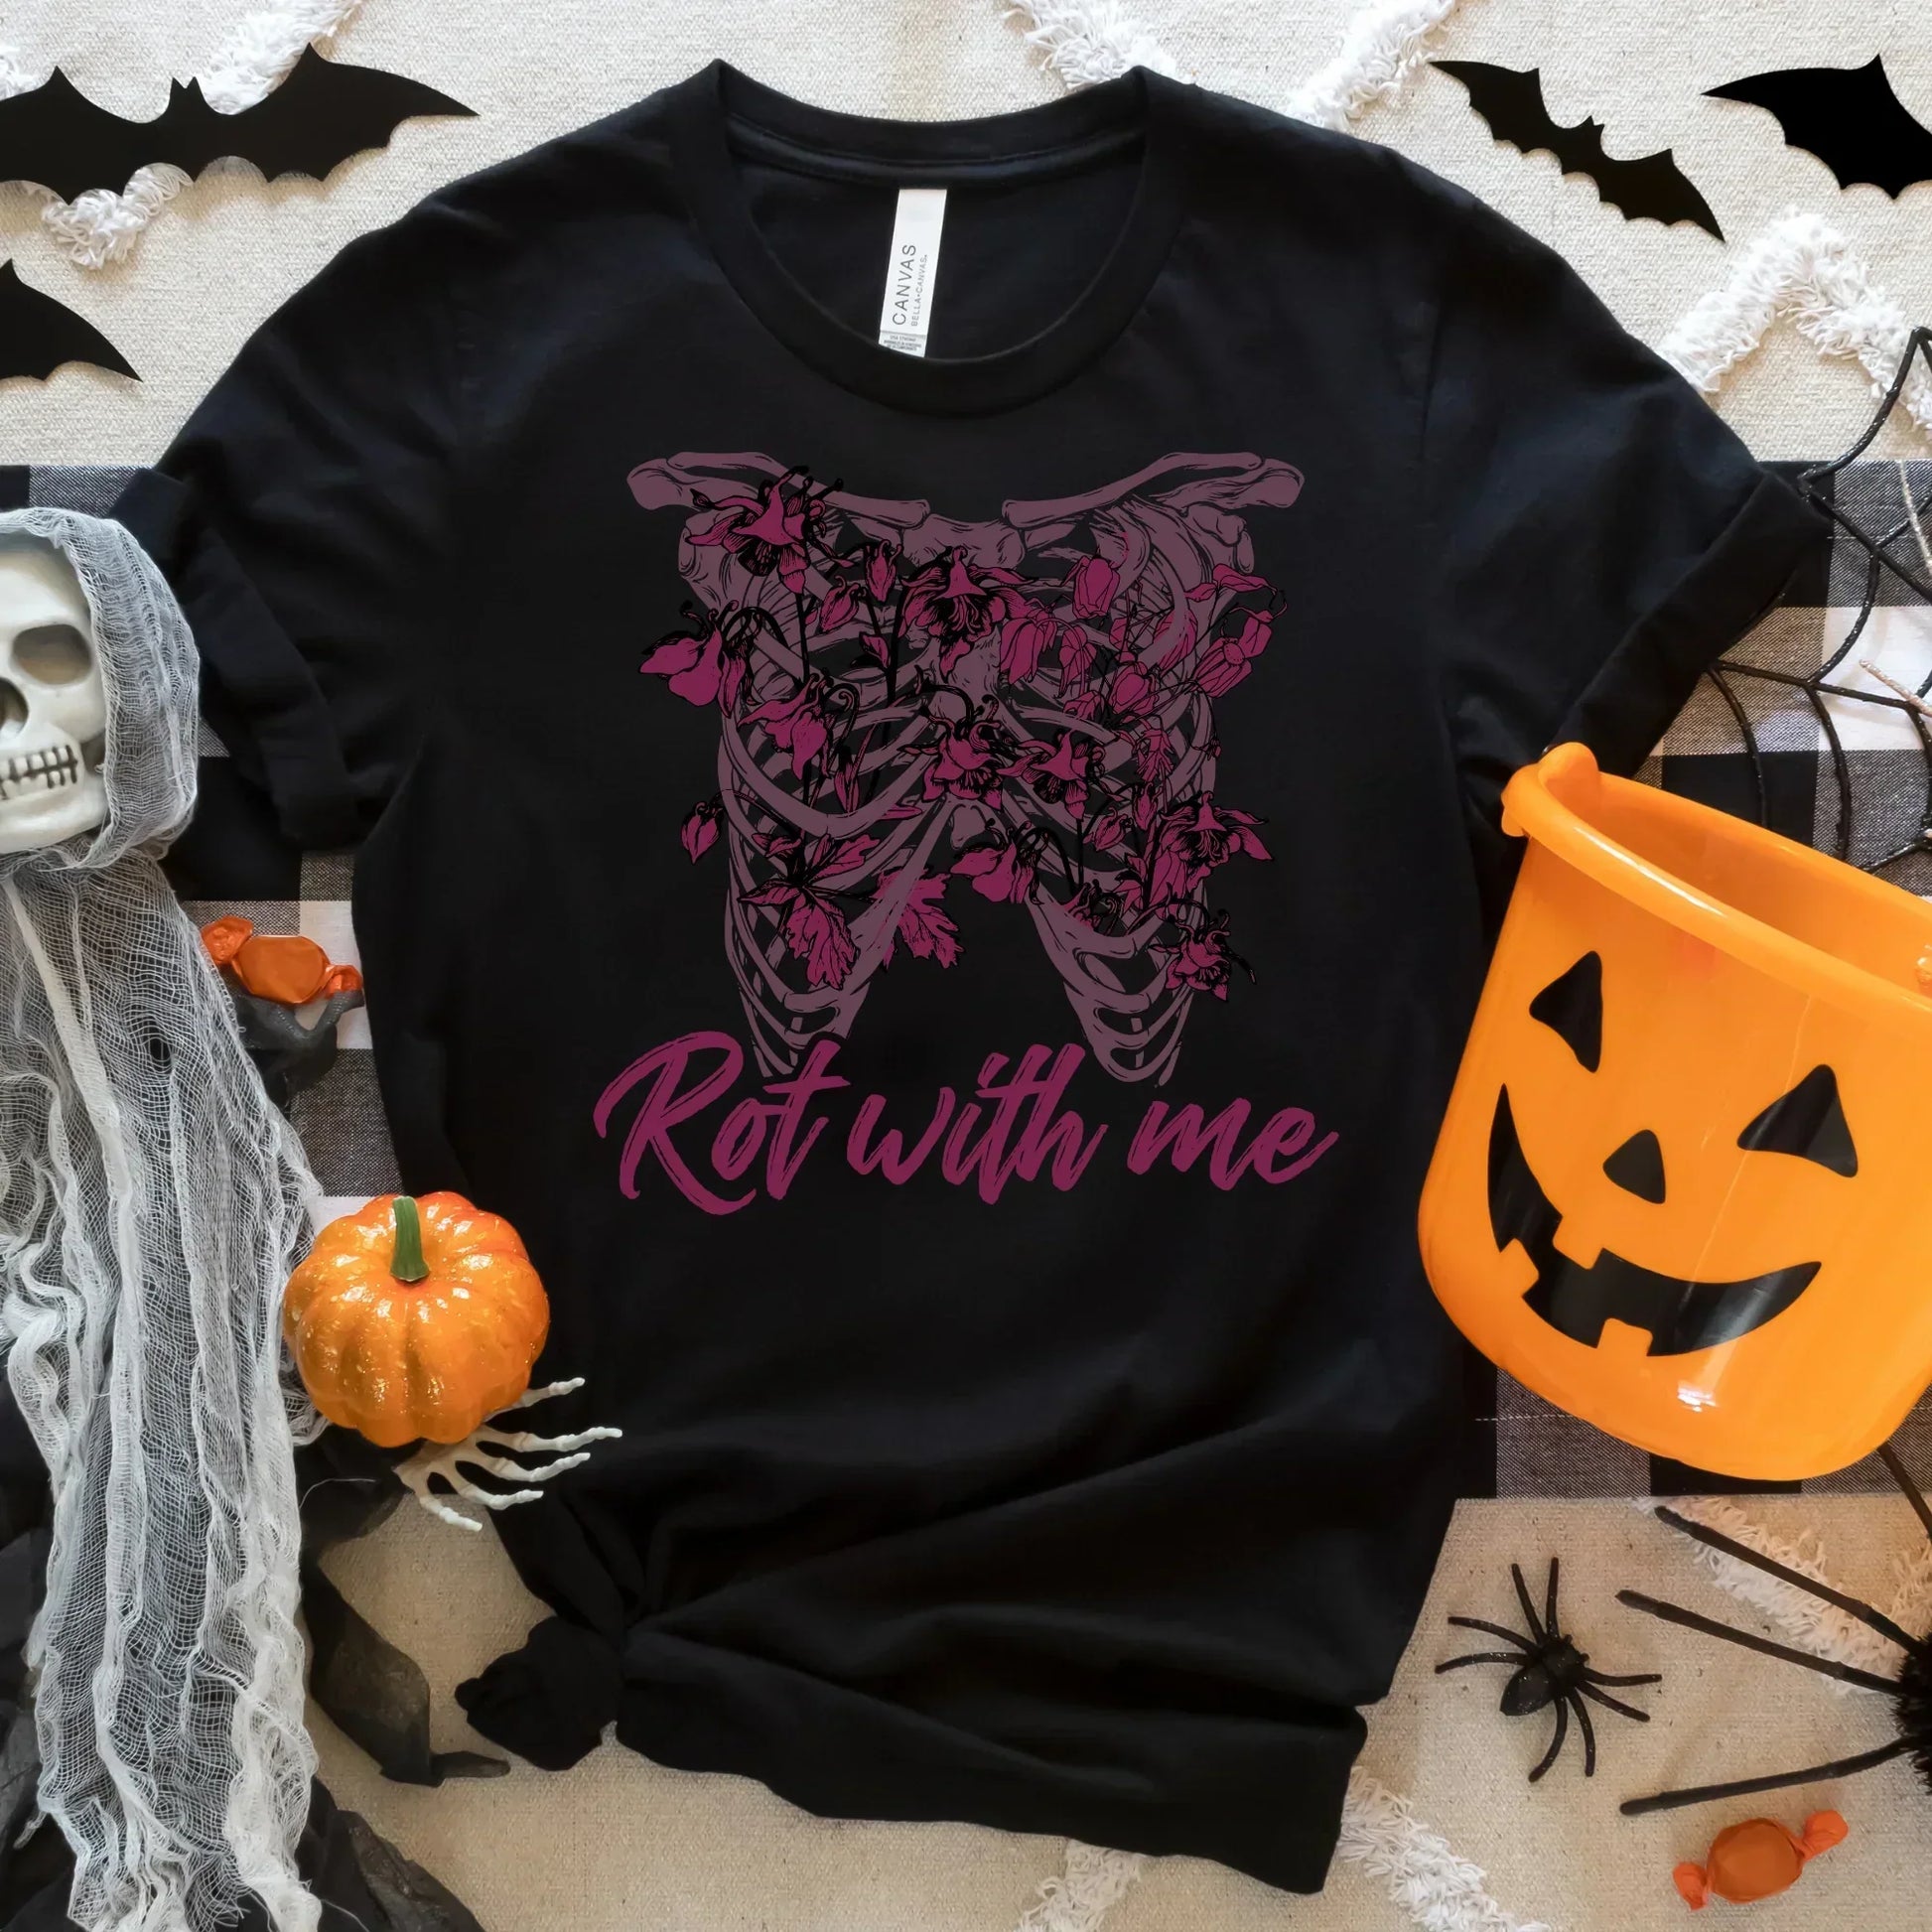 Rot with Me, Gothic Shirt, Halloween Sweatshirt, Witchy Vibes, Bats & Dead Roses Shirt, Moon Shirt, Magical Witch Shirt, Goth Style, Rot with Me, EMO Tee